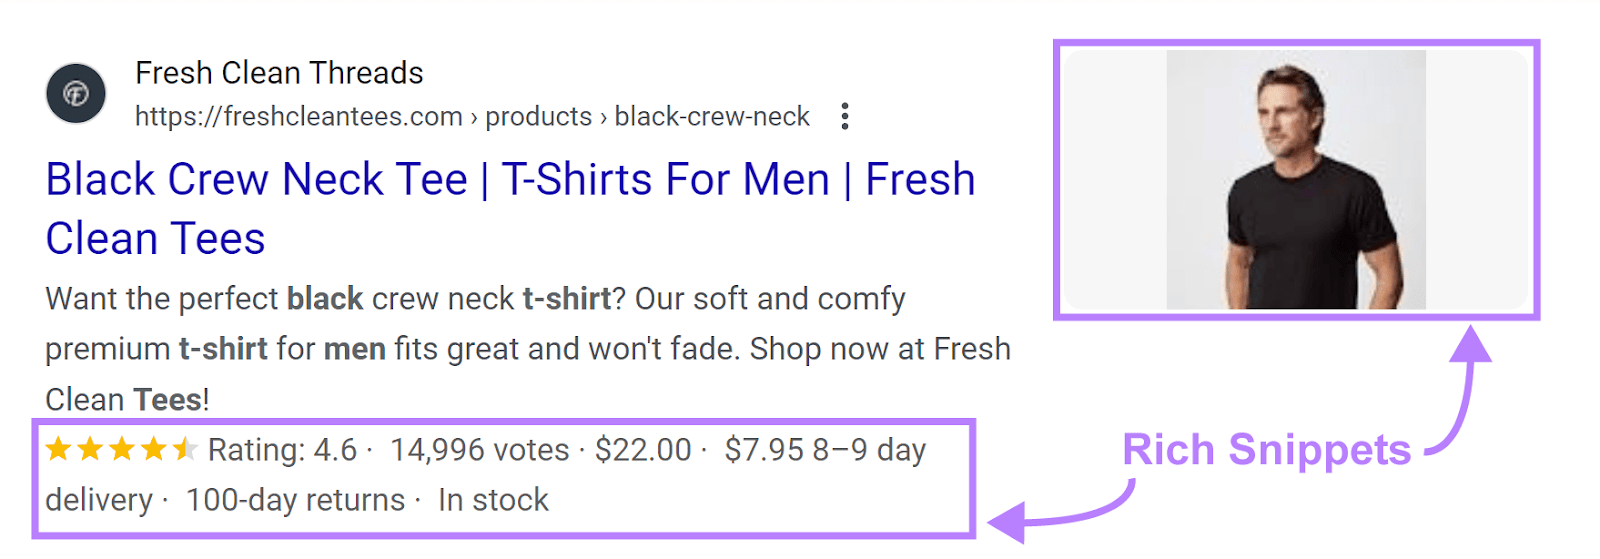 Fresh Clean Threads result on Google SERP containing rich snippets: an image, rating, votes, prices, delivery and return information, and stock